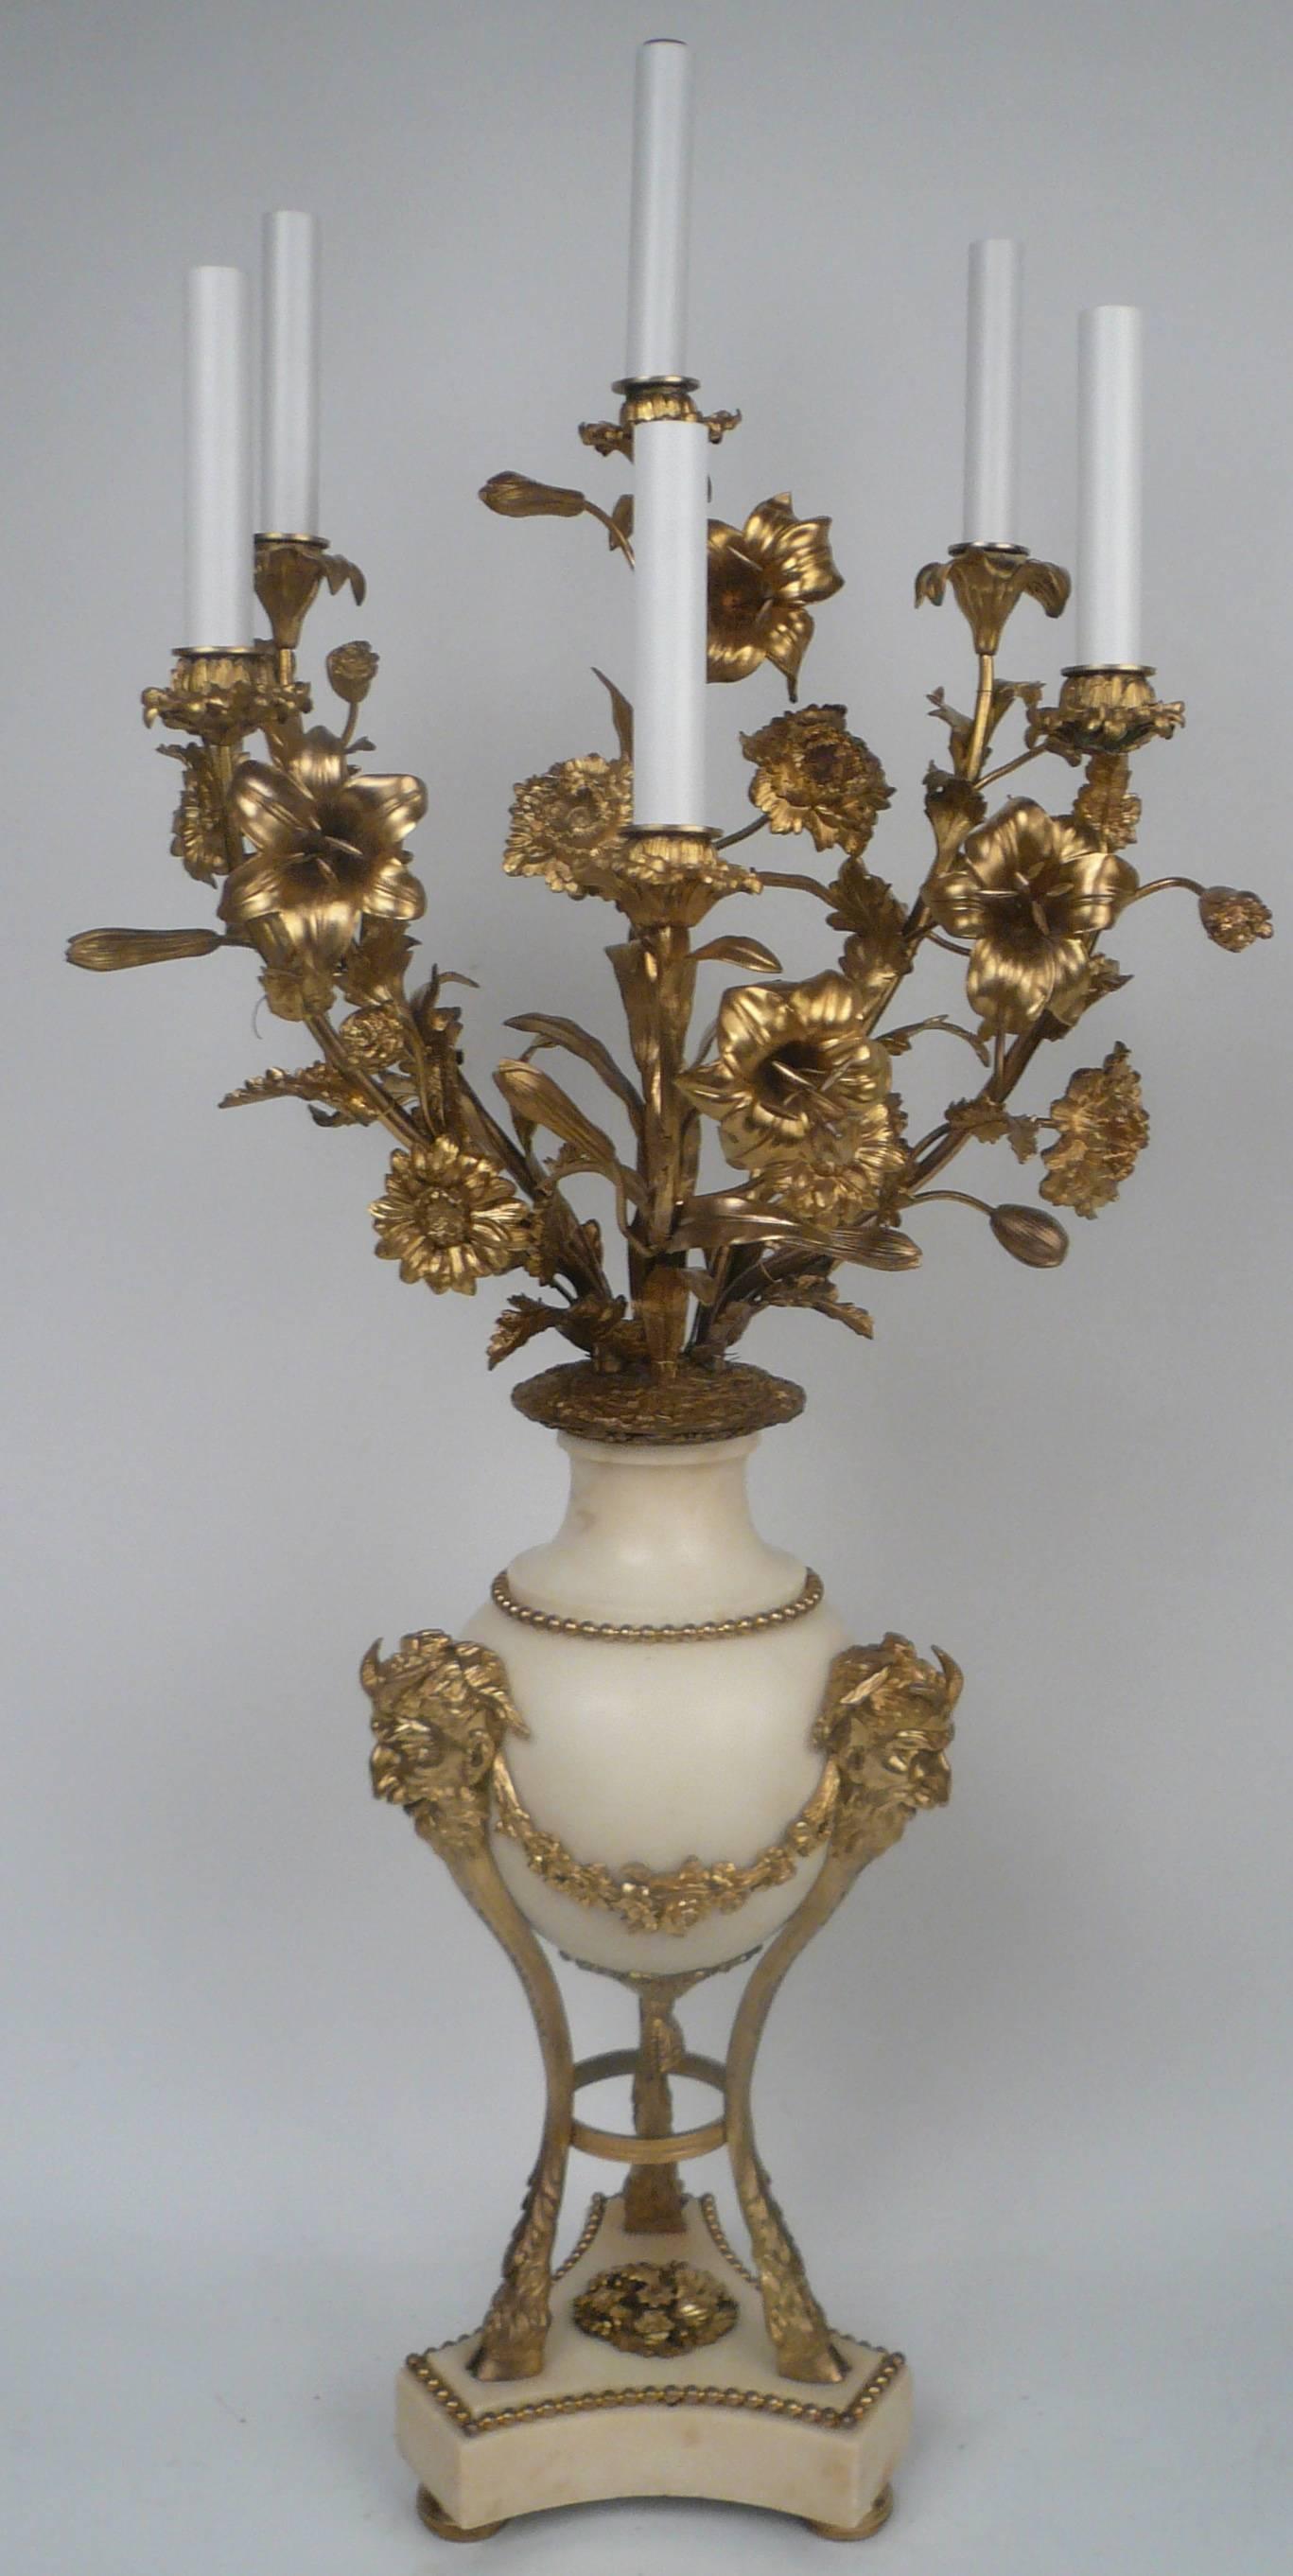 This imposing pair of neoclassical style candelabra feature naturalistic floral branches. The urn form bases of Carrara marble, are on tripod hoofed feet and have satyr masks and swaged floral garland decoration.